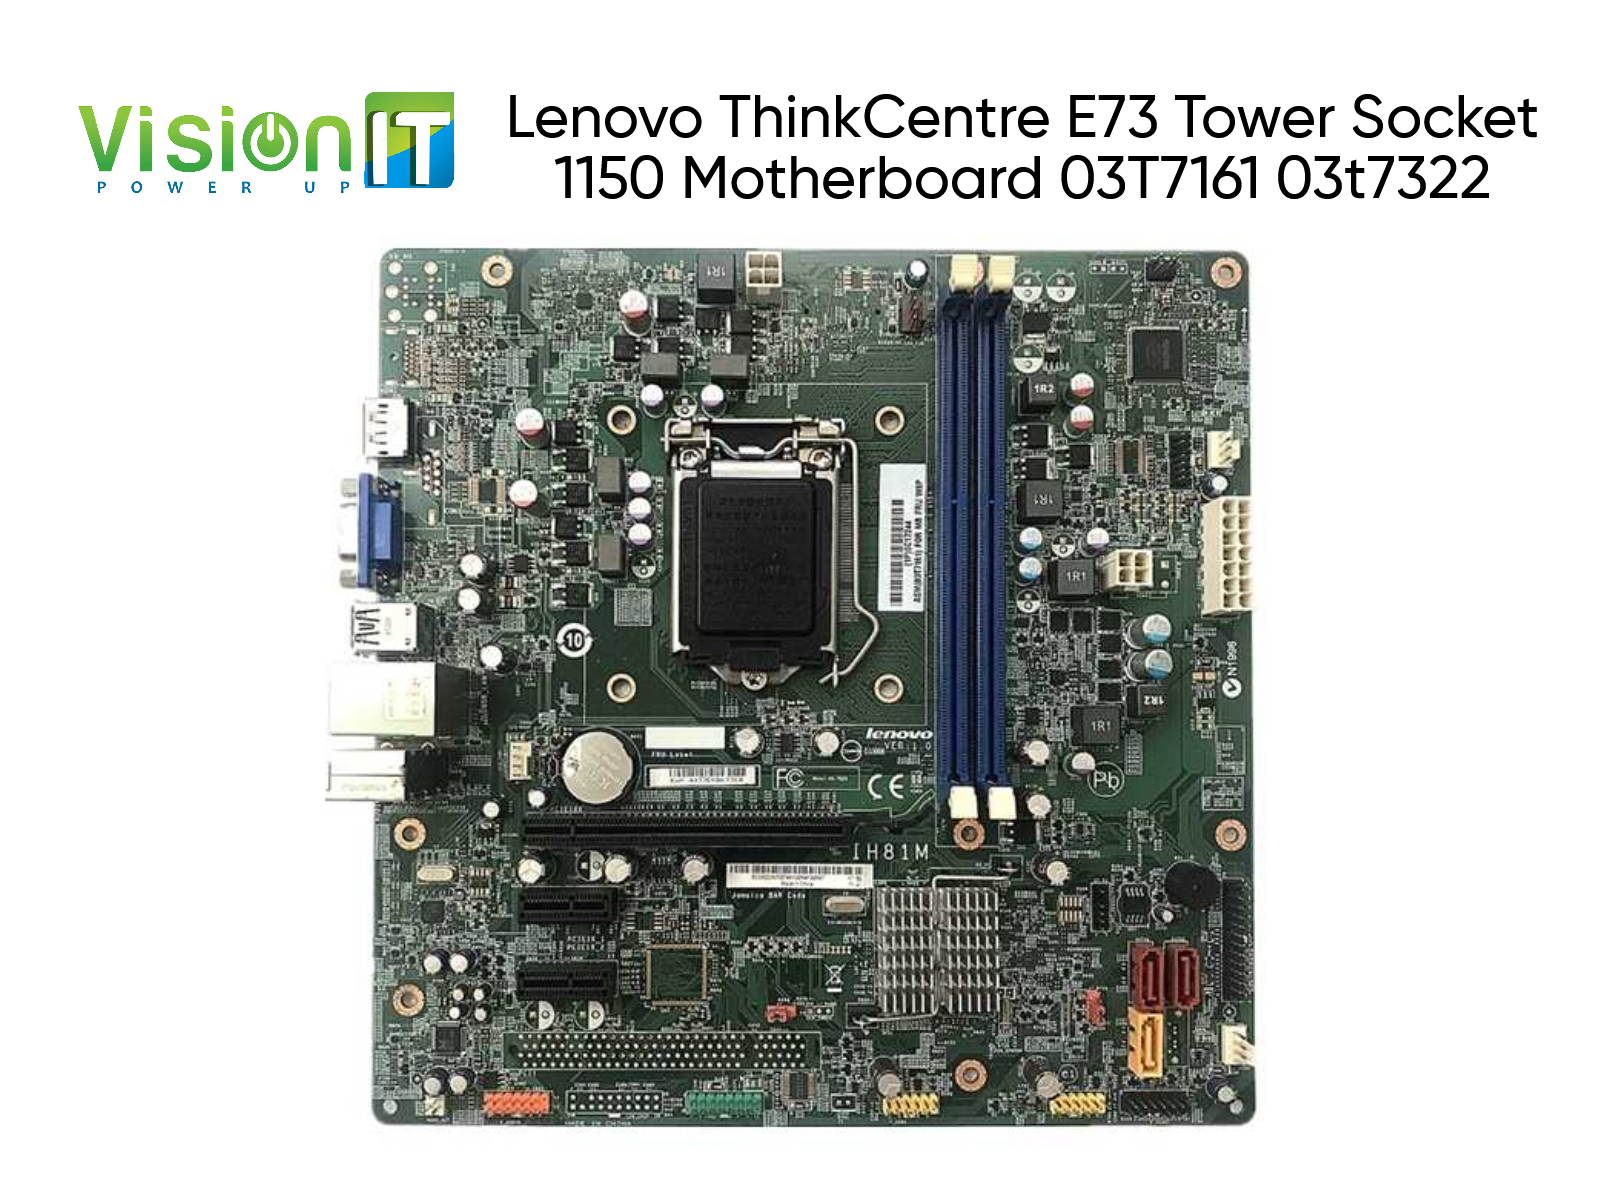 Lenovo ThinkCentre E73 Motherboard P/N – 03T7161 03t7322 03t7235 IH81M 00kt255 00RK289 03T7162